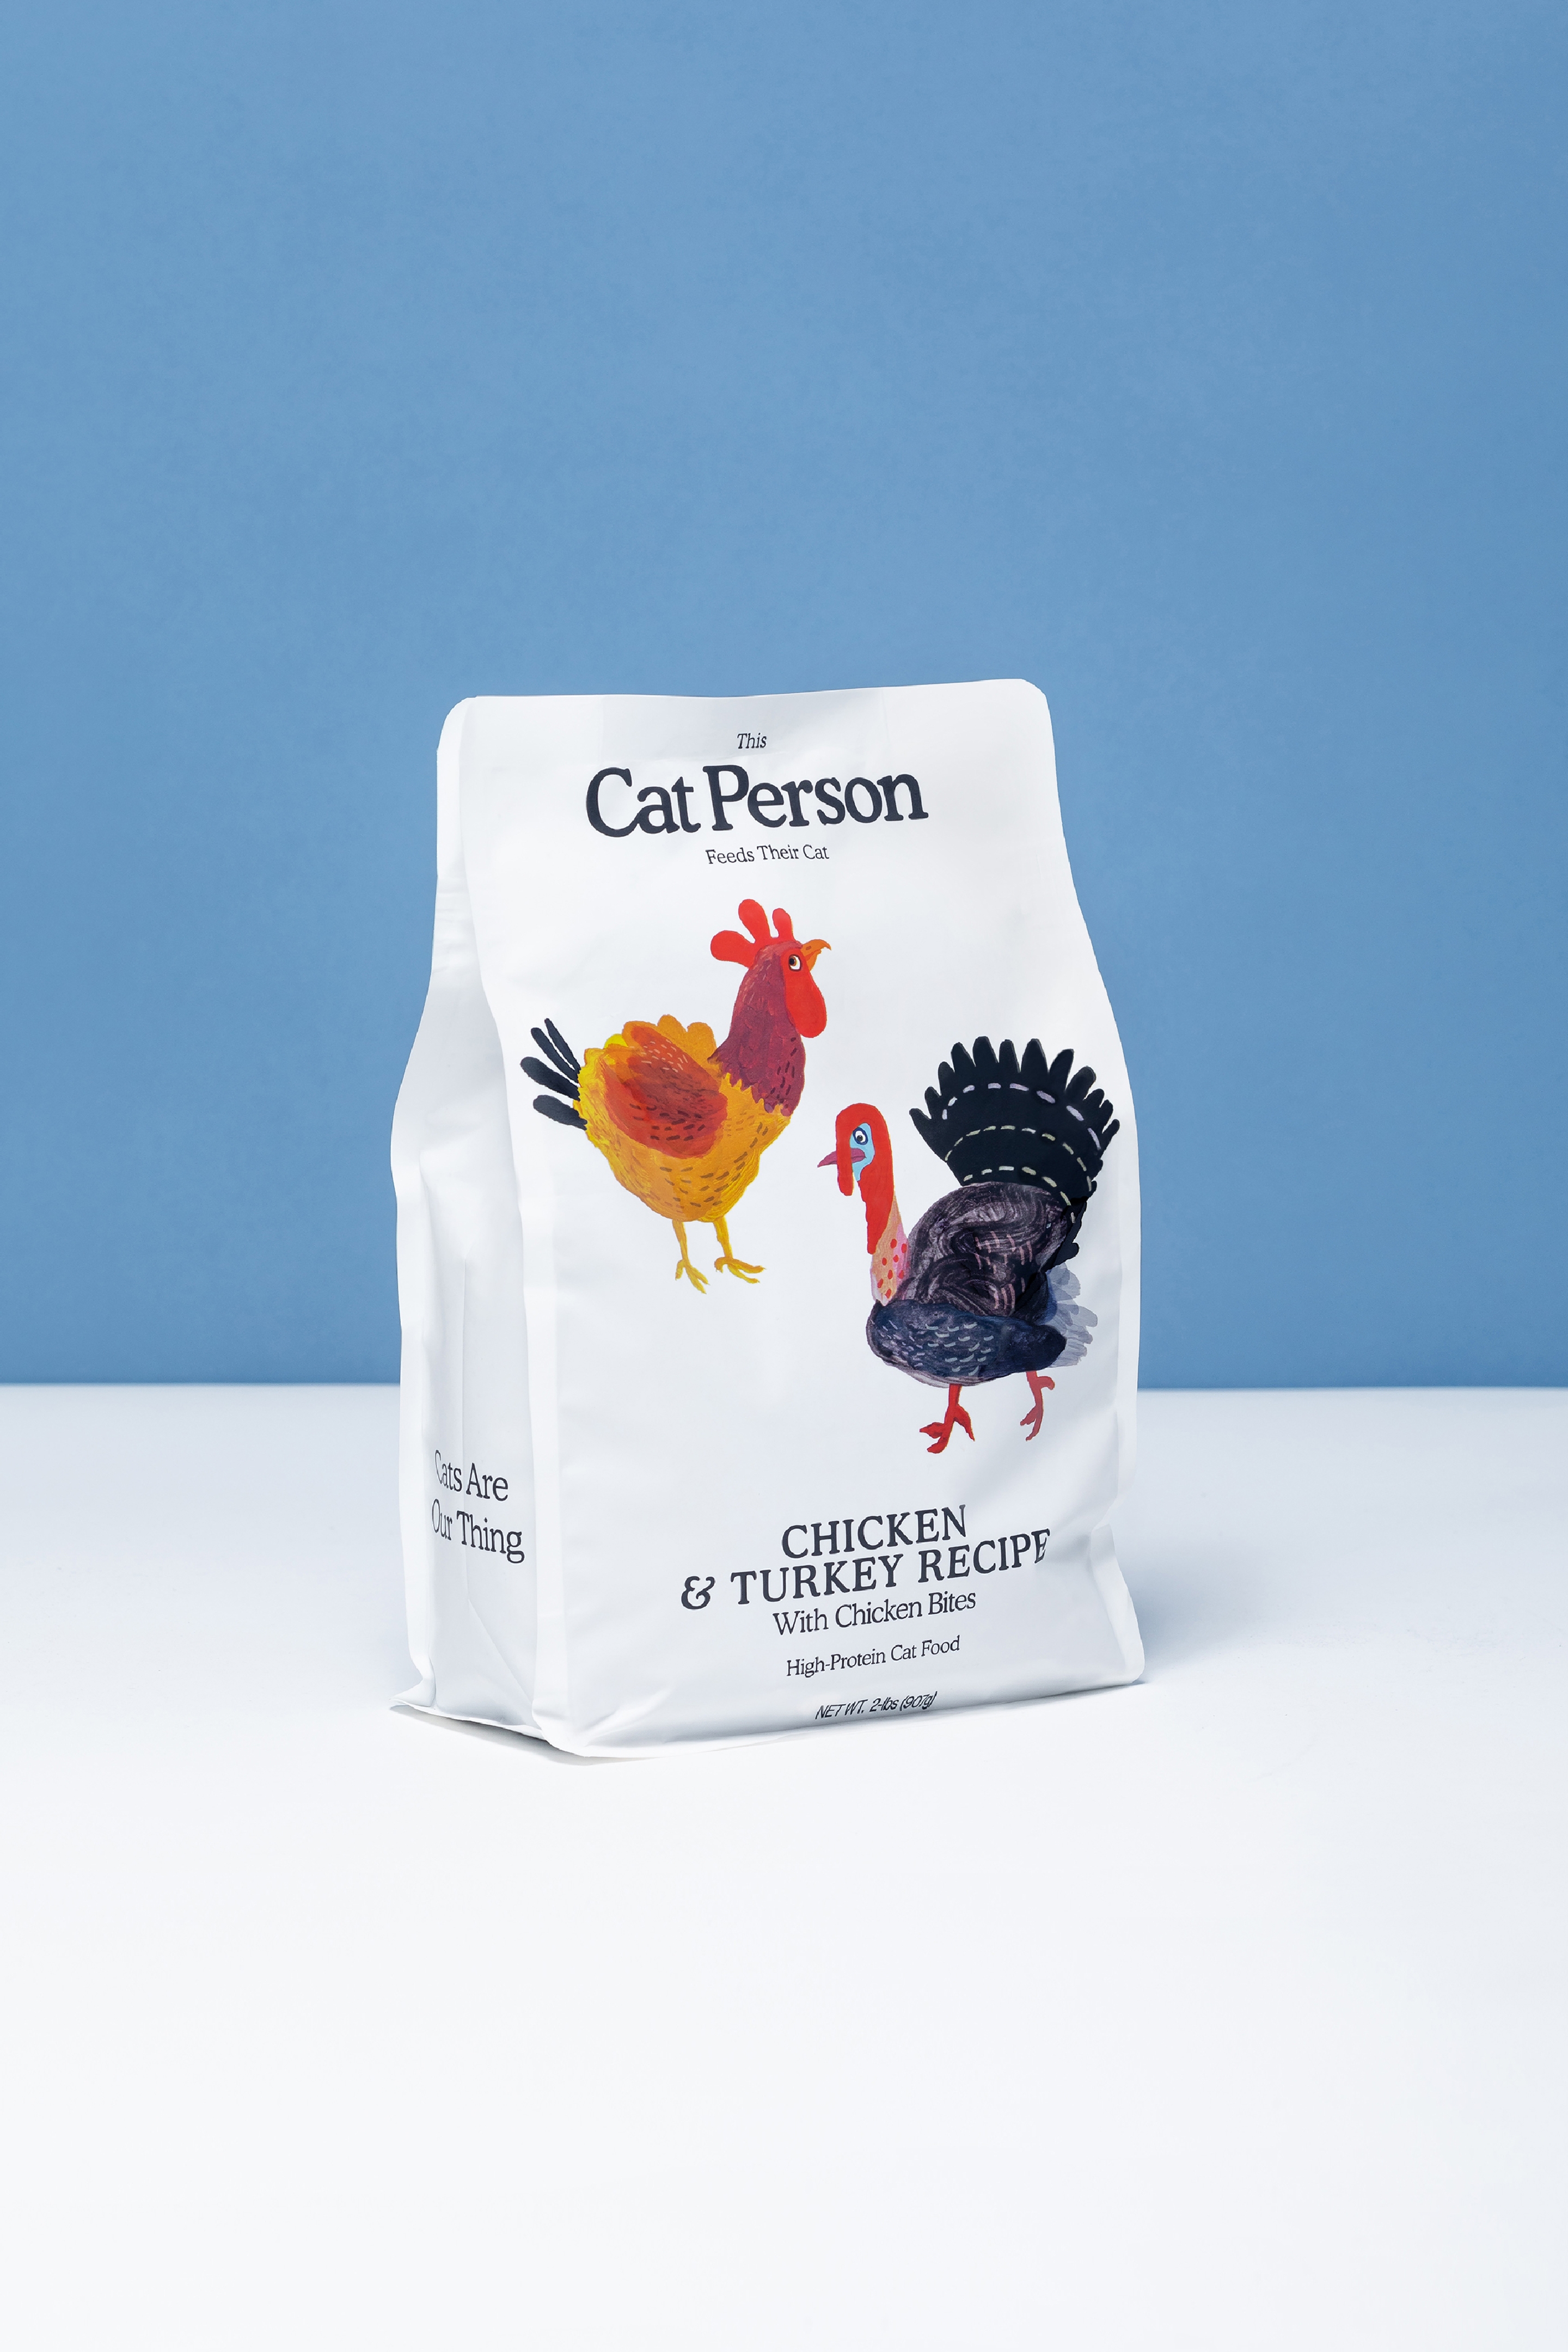 Bag of Cat Person chicken and turkey dry food